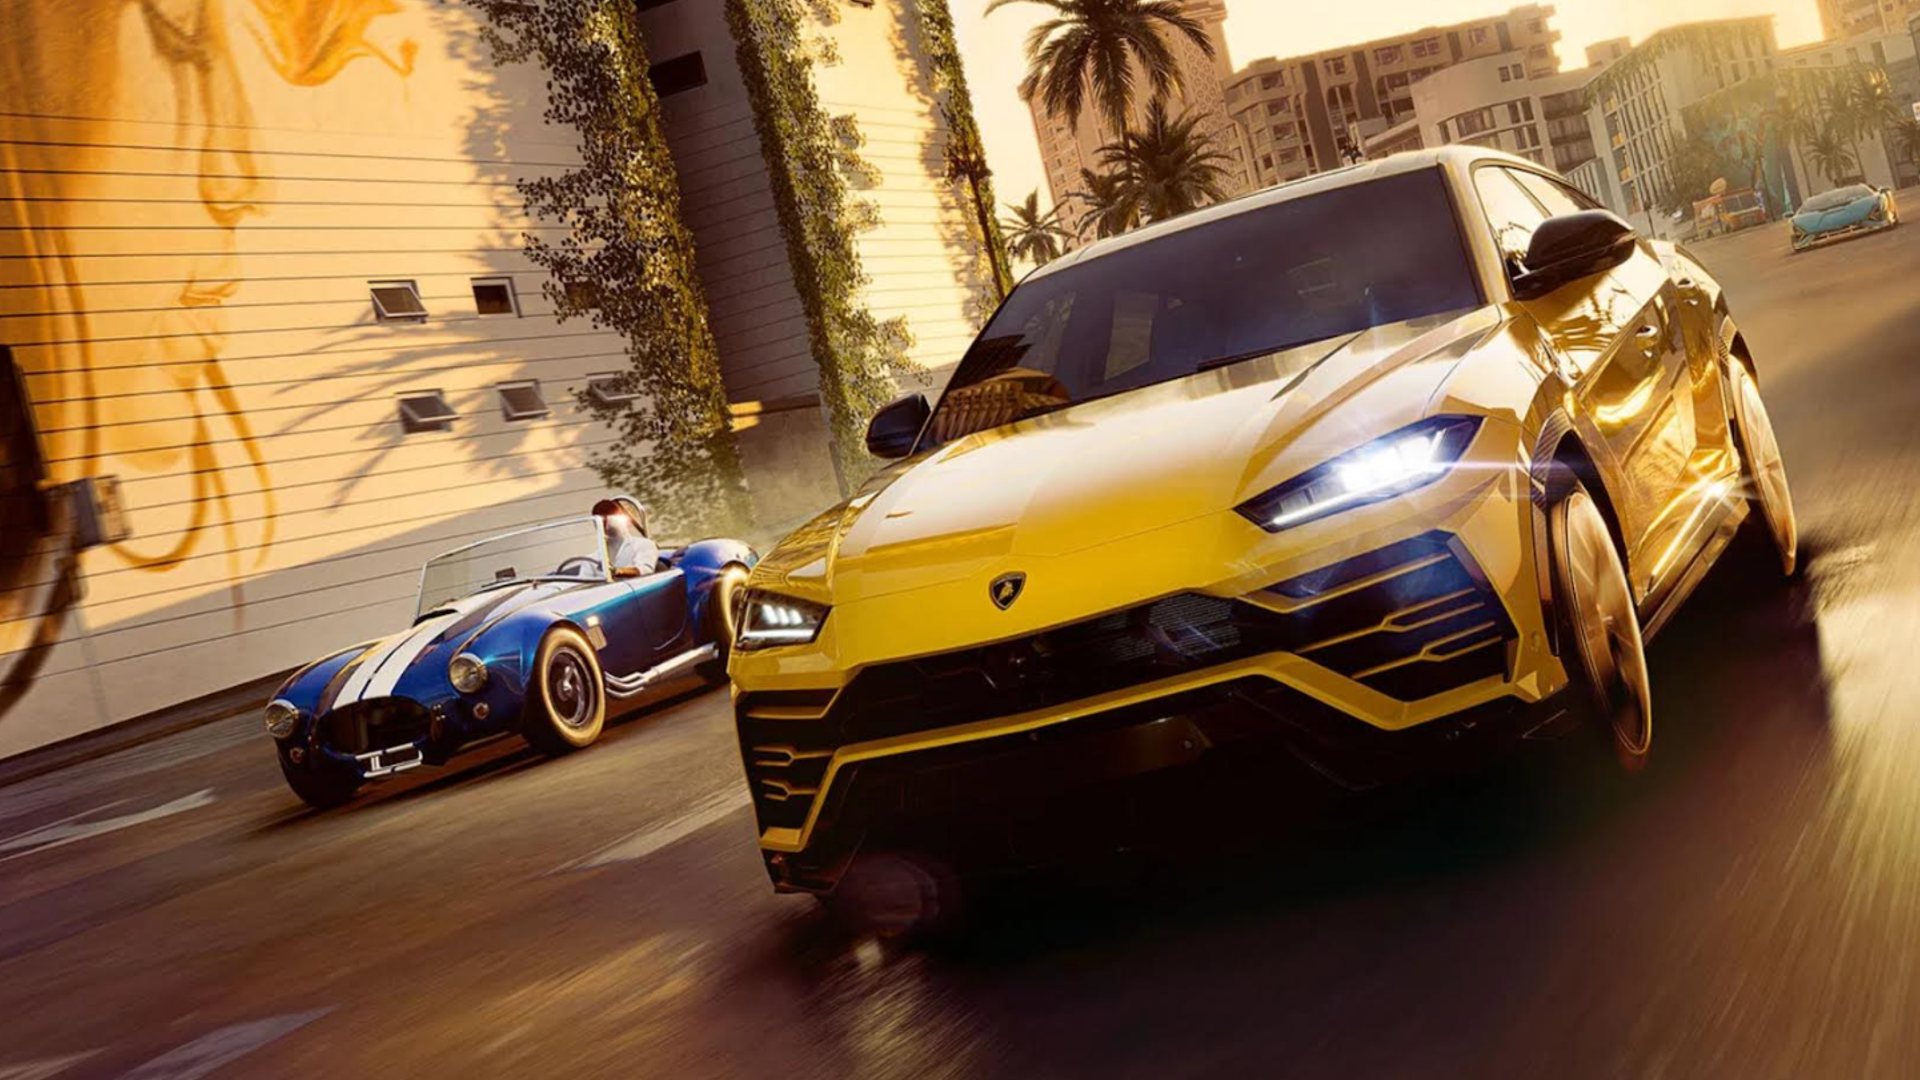 Does The Crew Motorfest have split-screen multiplayer?